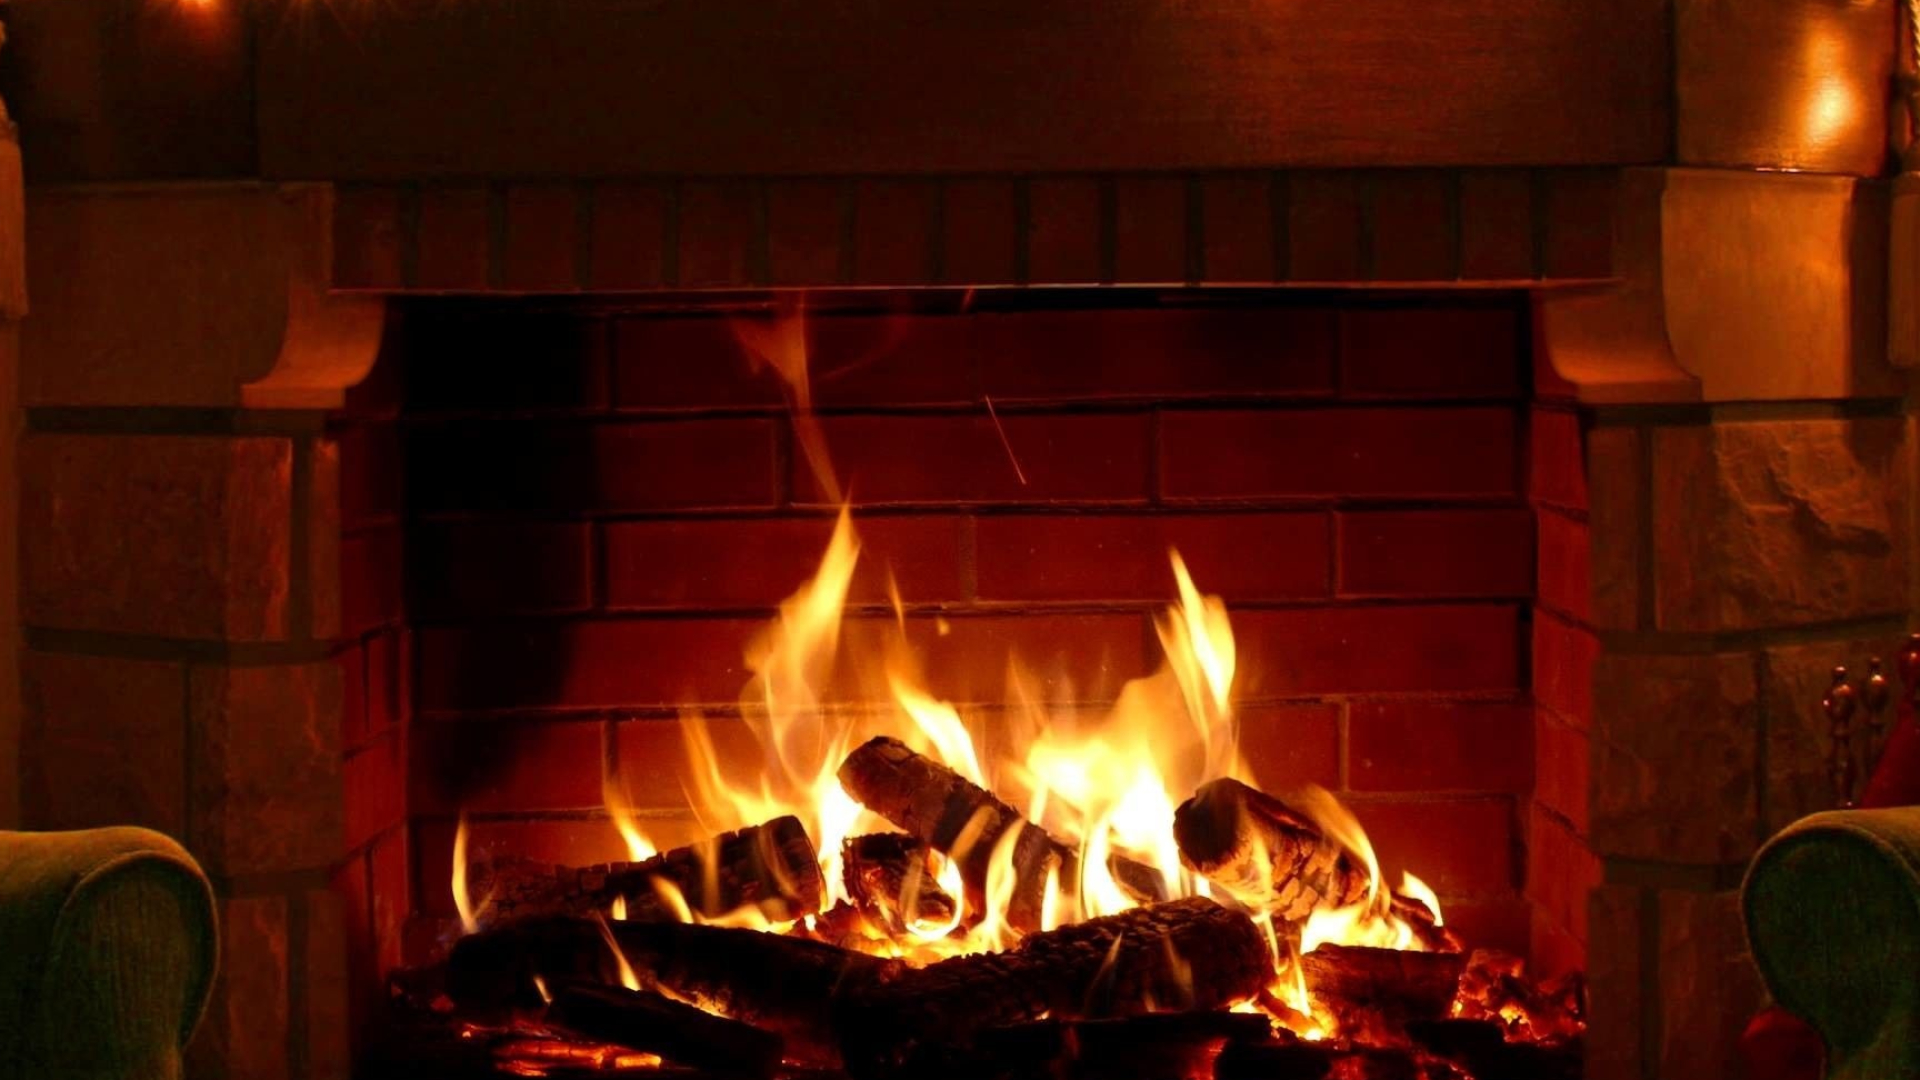 Fireplace: Masonry space where wood is burnt and vented outside via a chimney. 1920x1080 Full HD Wallpaper.